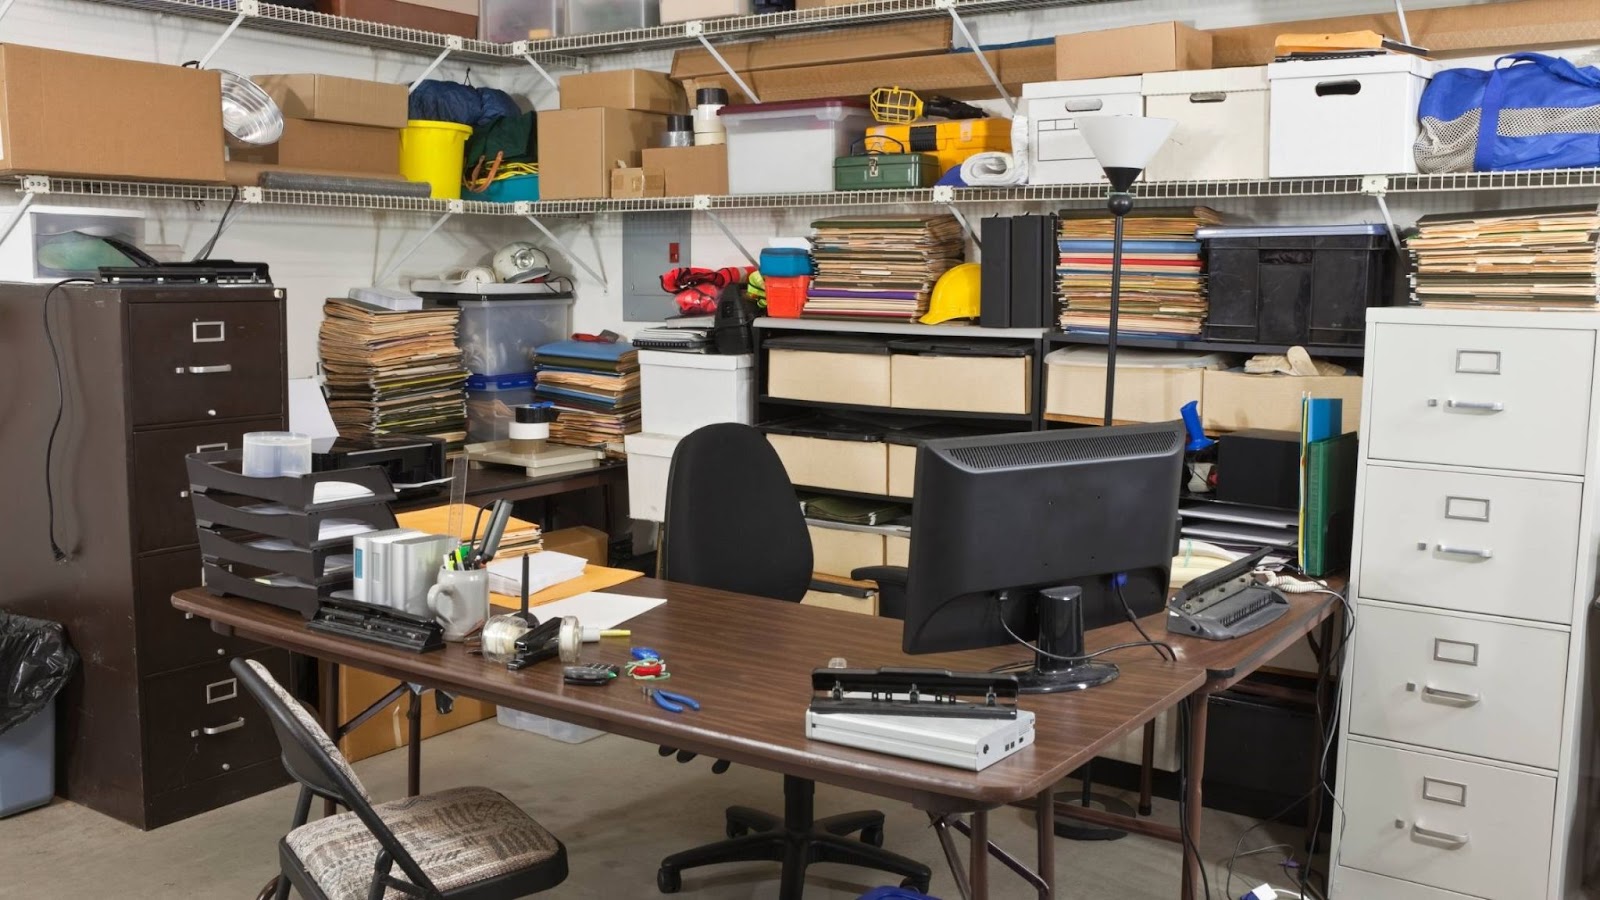 Back office support: A messy back office.